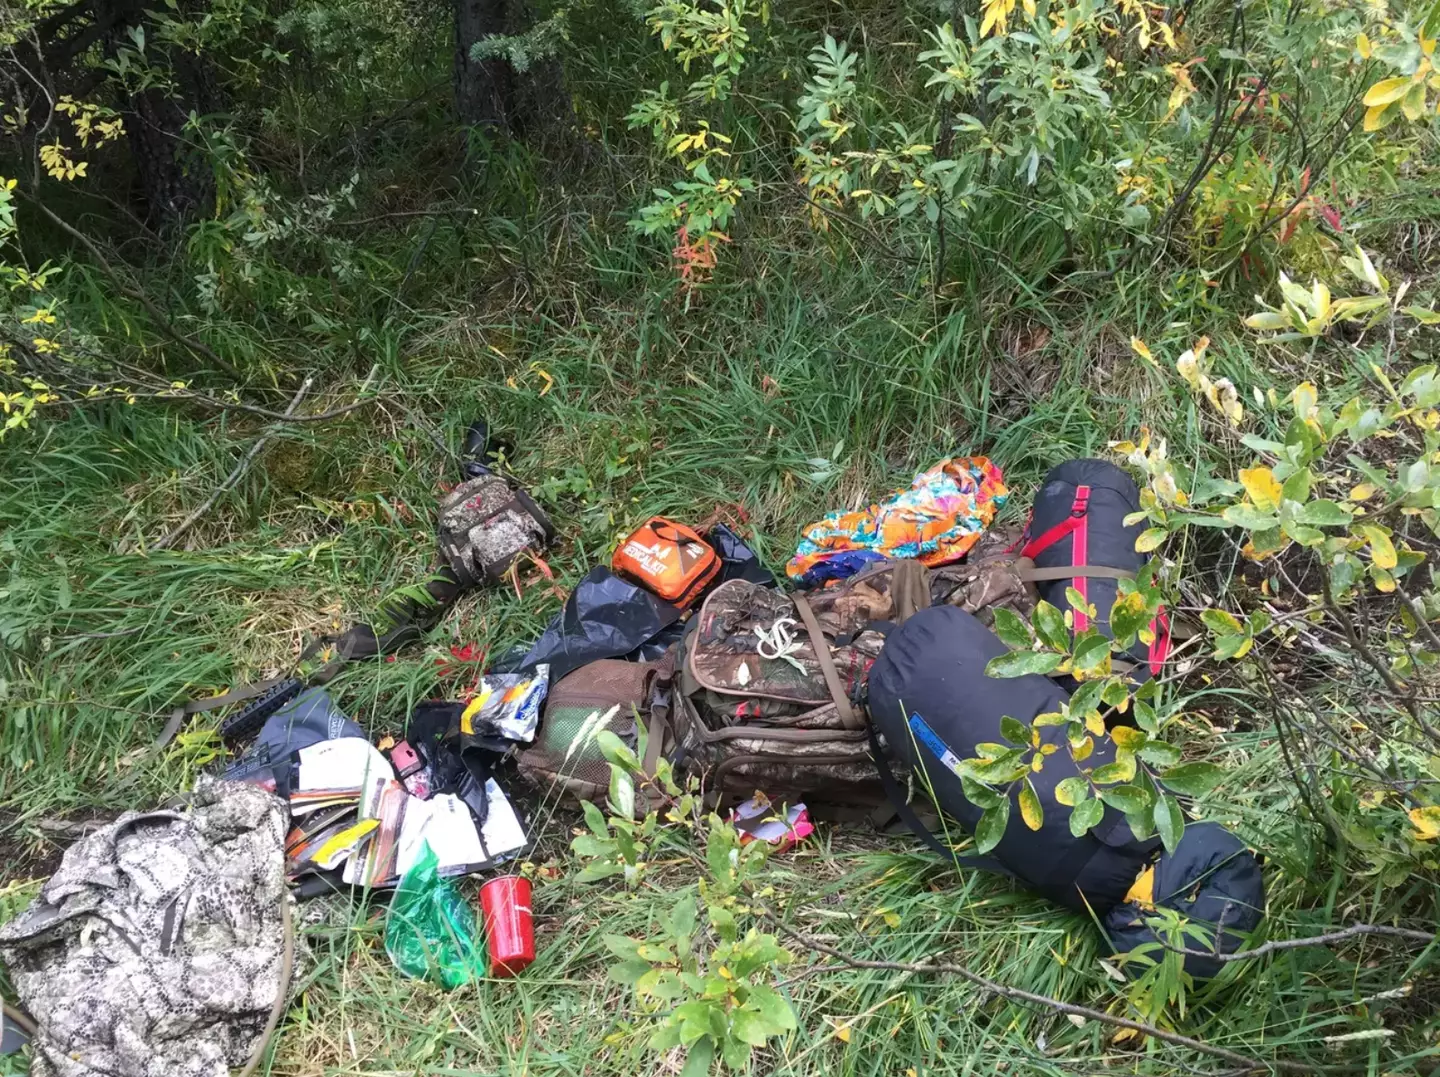 Jeremy's belongings were scattered in the woods after the attack.